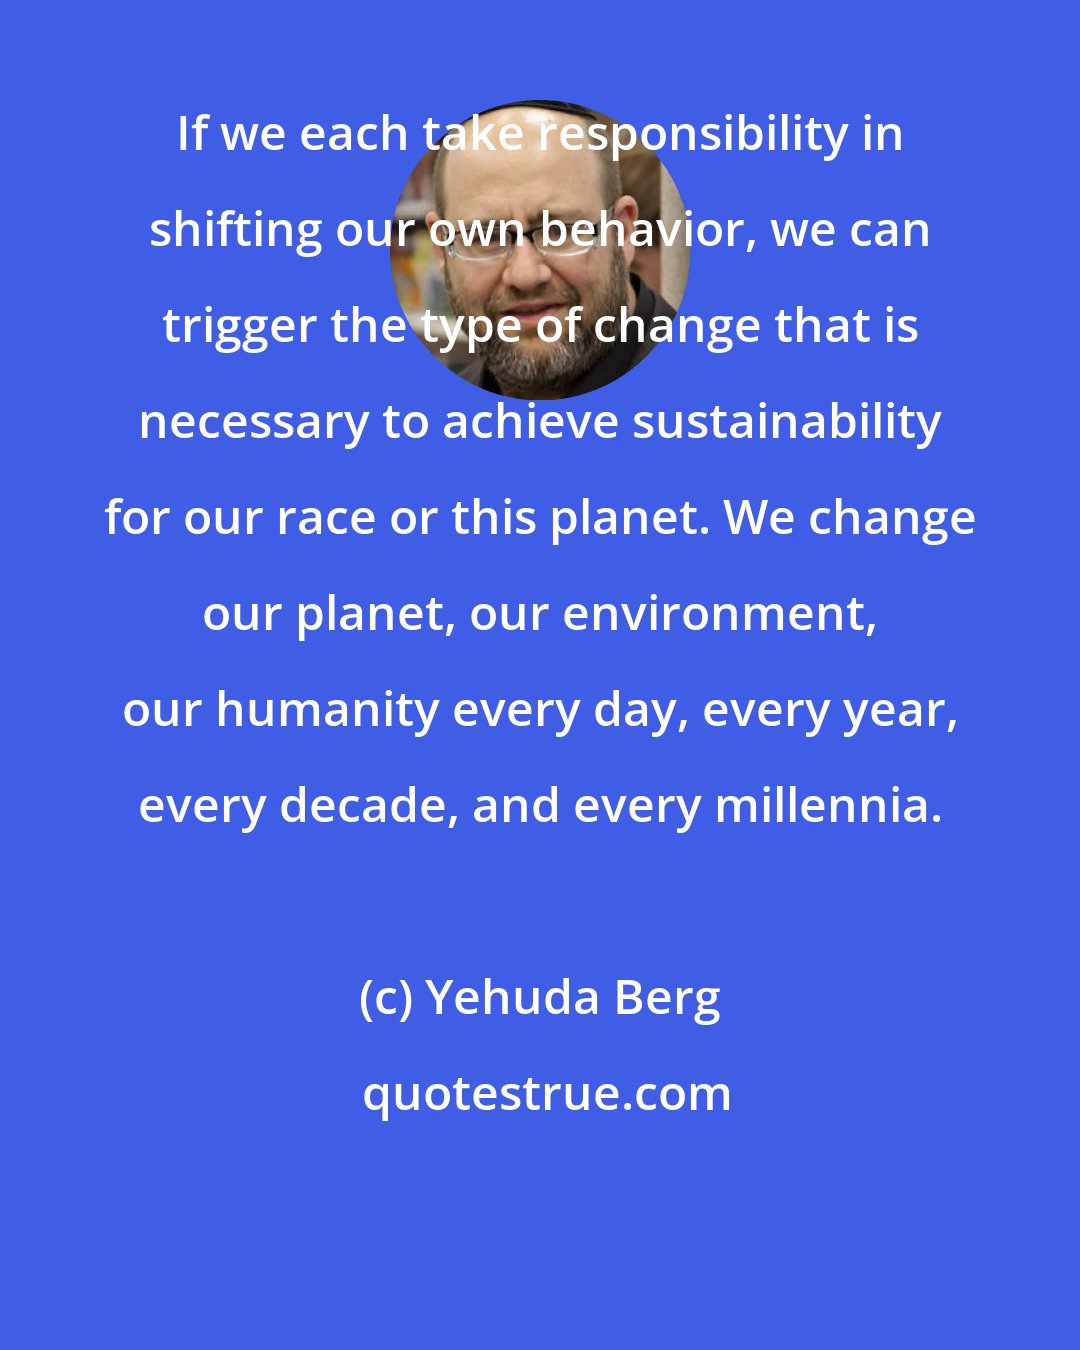 Yehuda Berg: If we each take responsibility in shifting our own behavior, we can trigger the type of change that is necessary to achieve sustainability for our race or this planet. We change our planet, our environment, our humanity every day, every year, every decade, and every millennia.